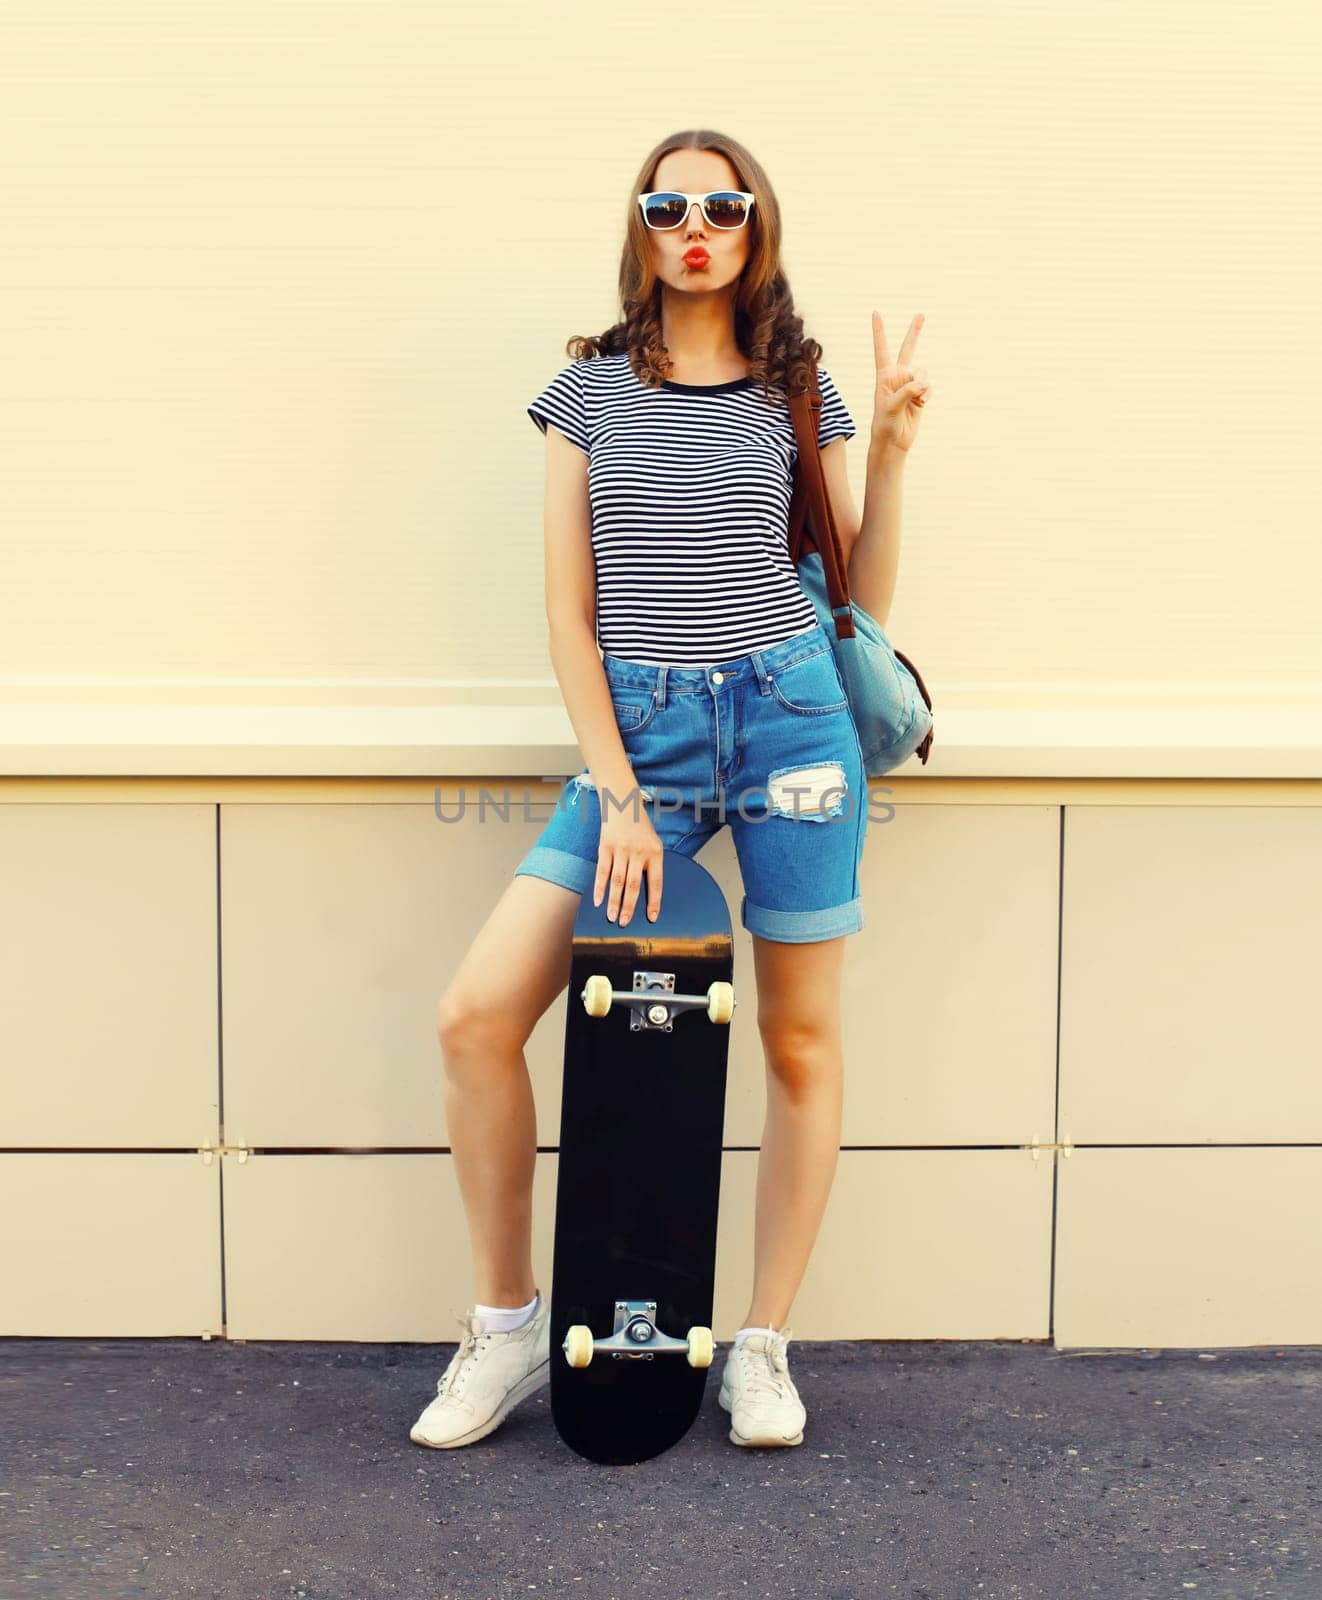 Portrait of cheerful young woman with skateboard in the city by Rohappy